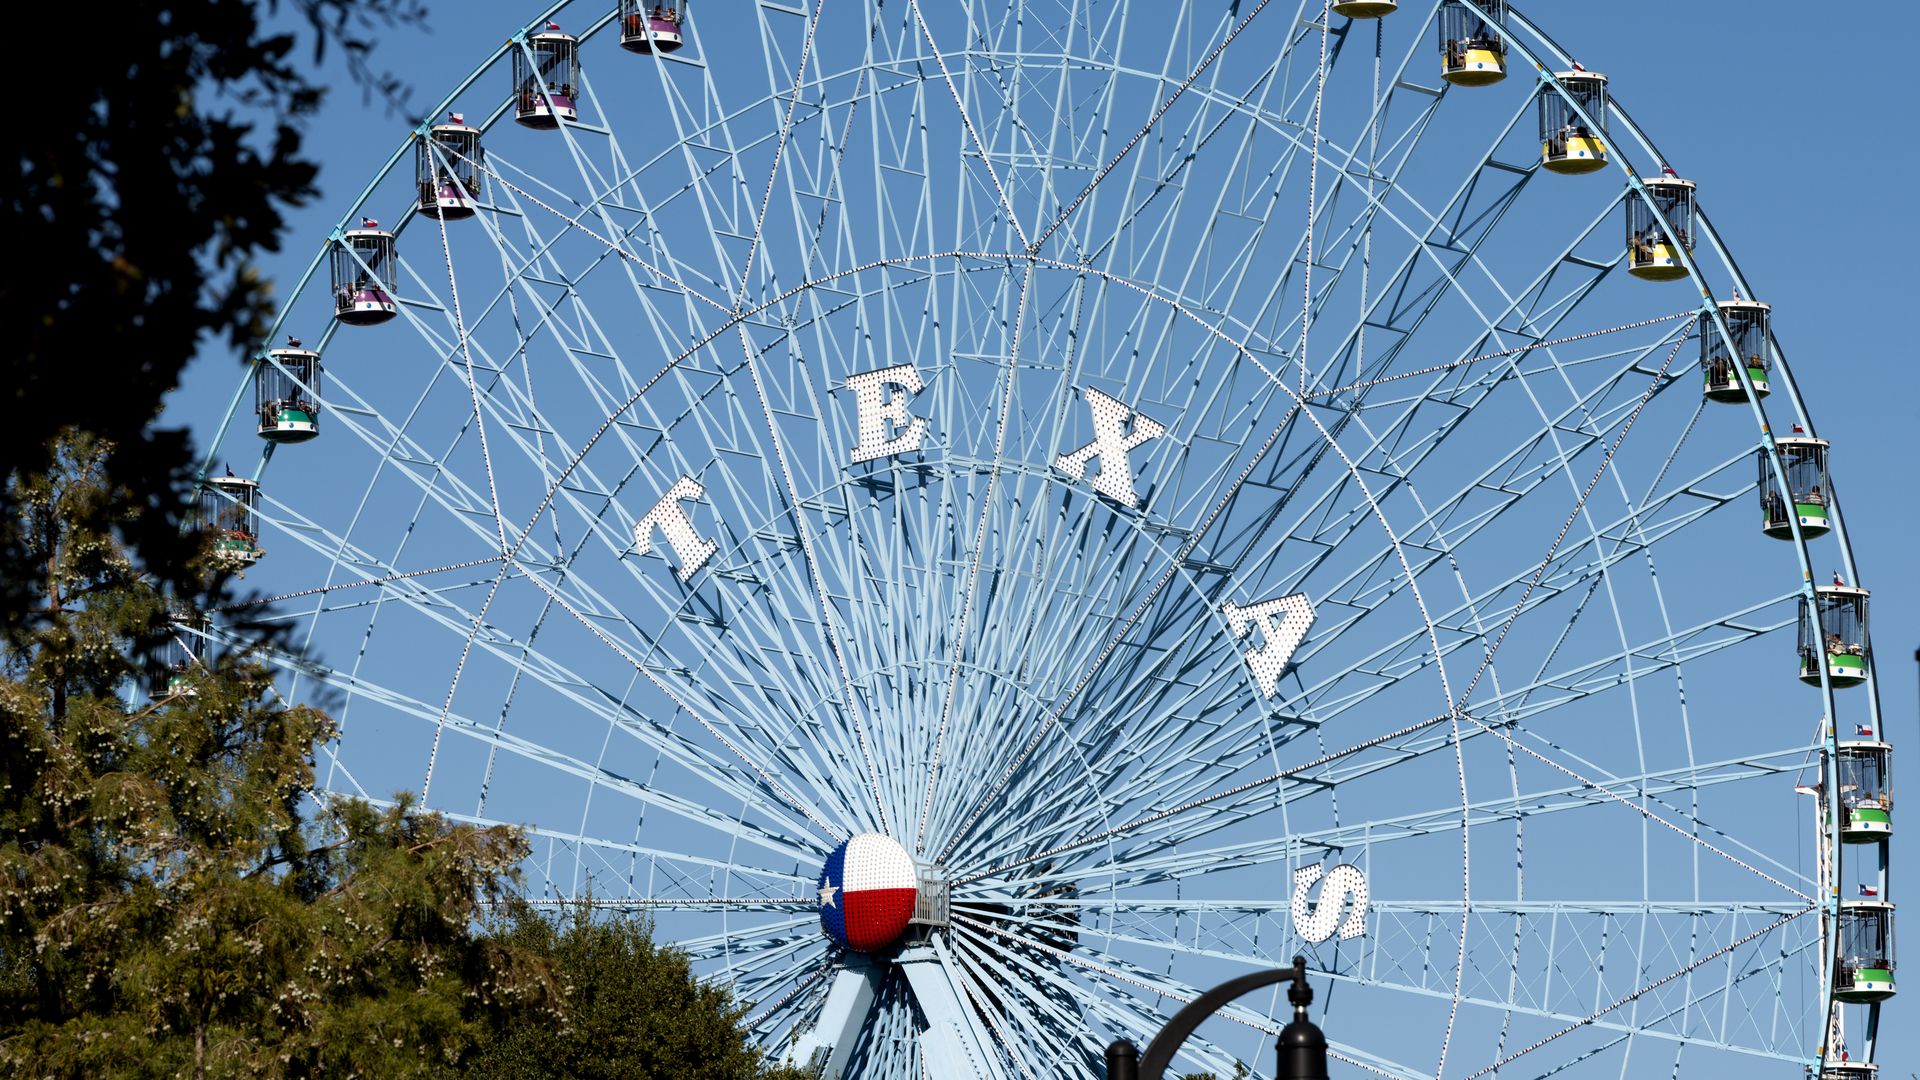 A photo of the ferris wheel at the State Fair of Texas